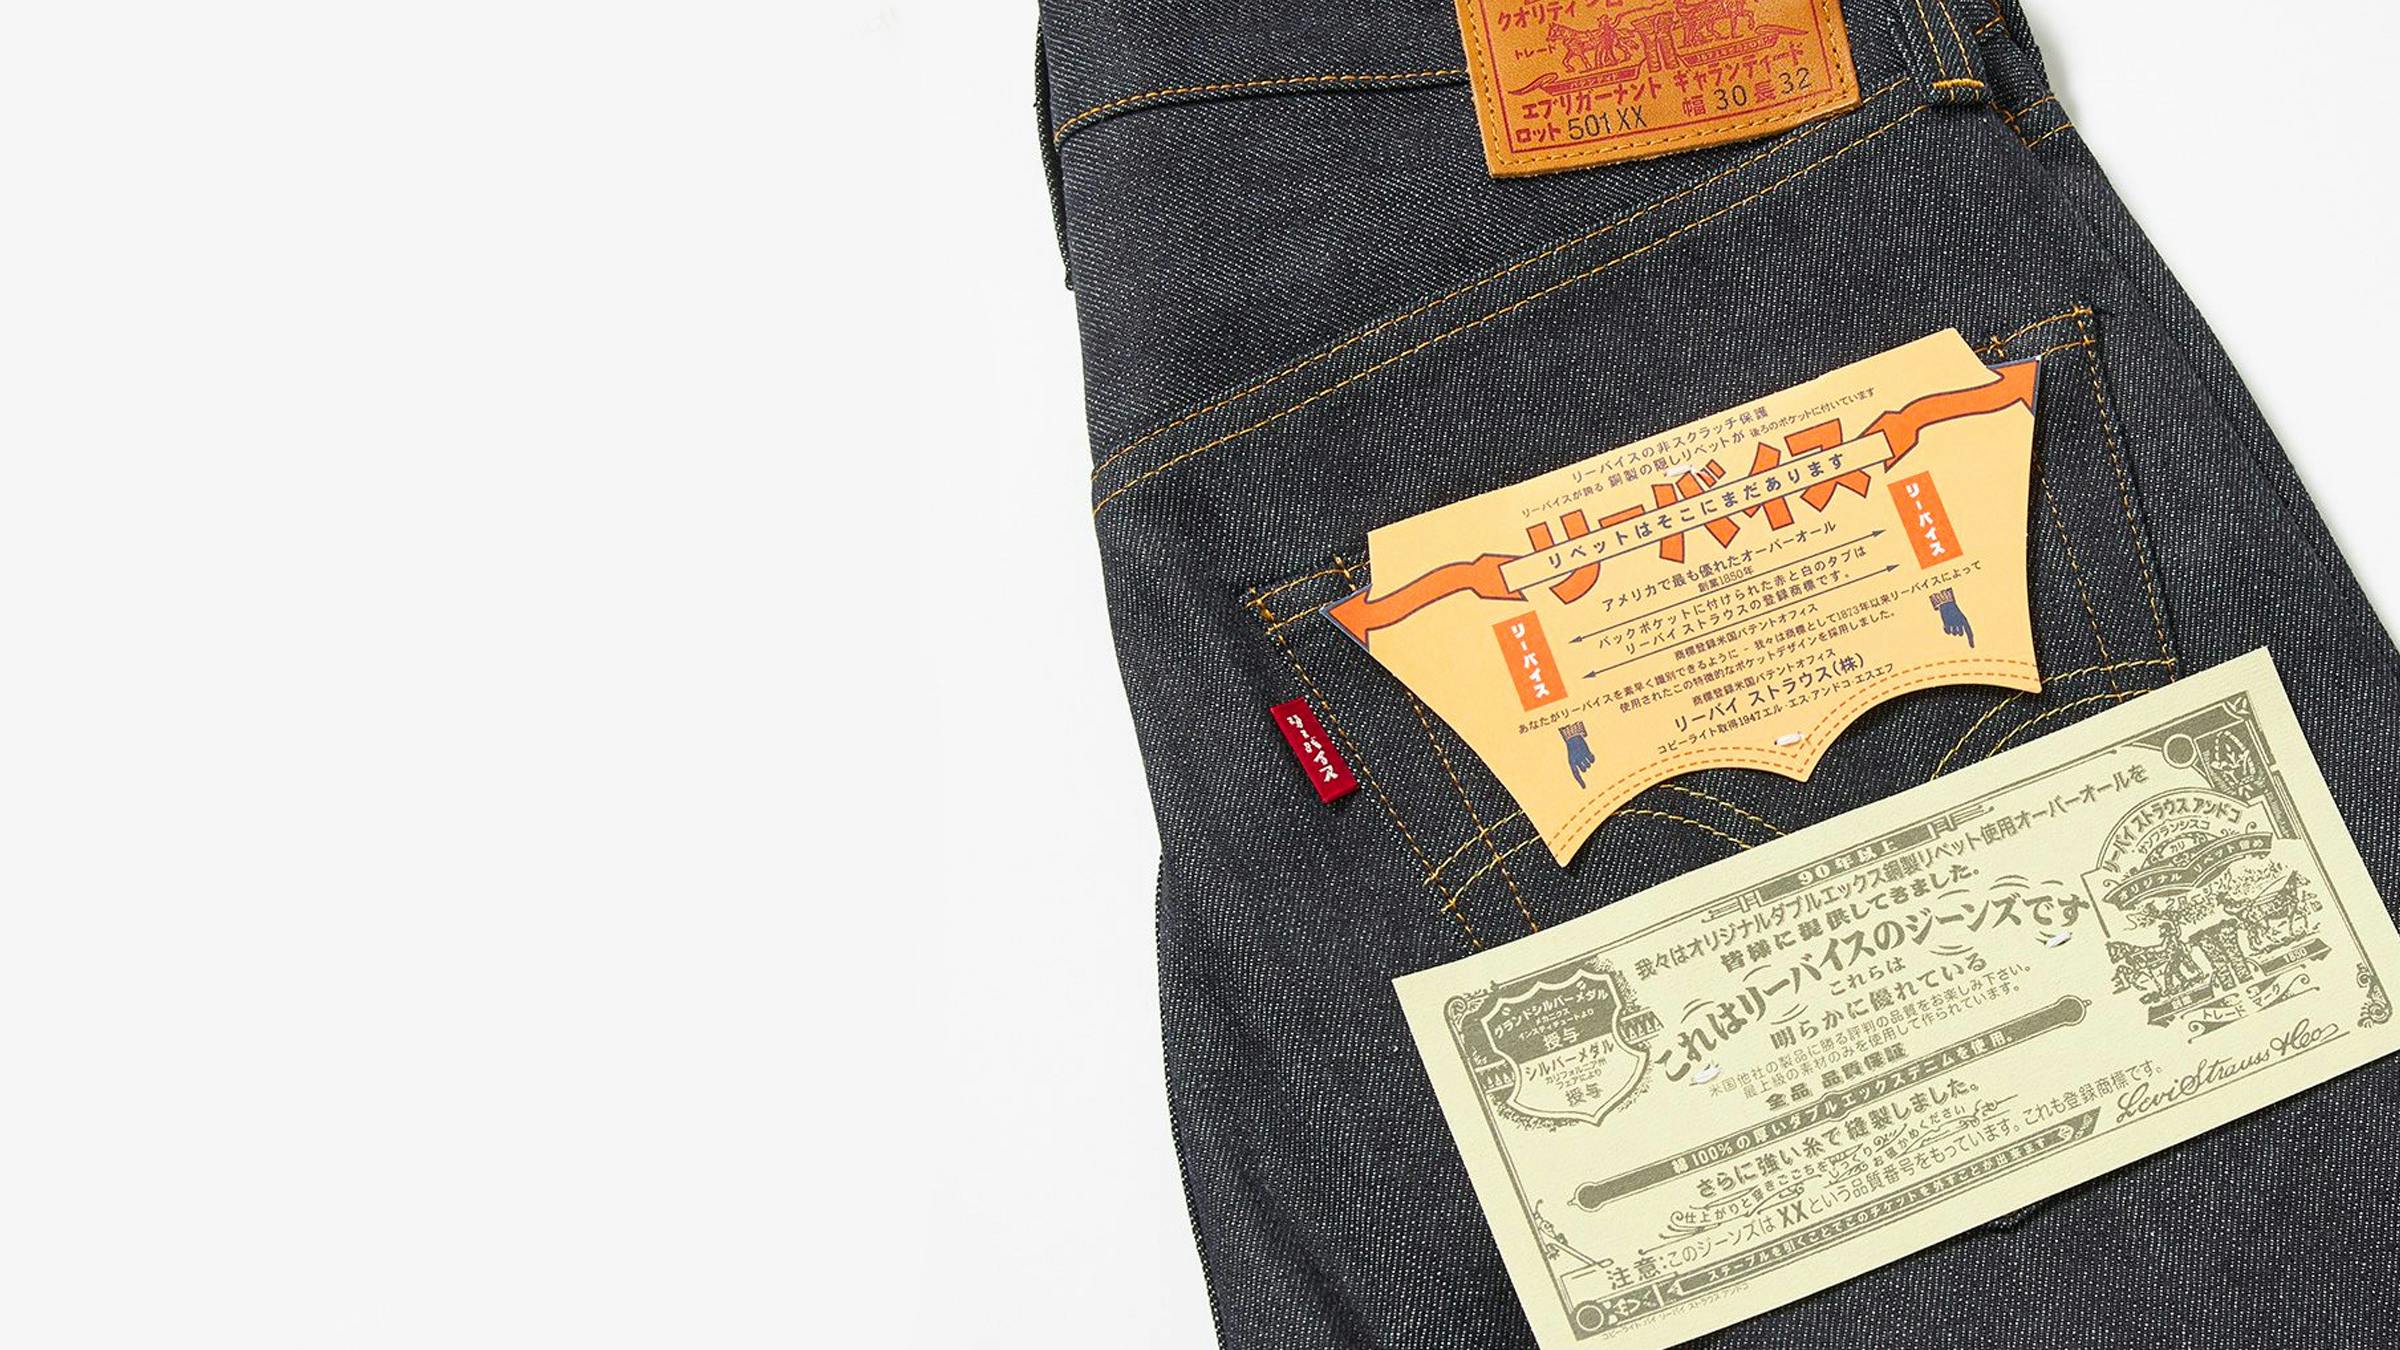 FW19 Levi's Vintage Clothing at Canoe Club  Levis vintage clothing, Vintage  outfits, Vintage levis